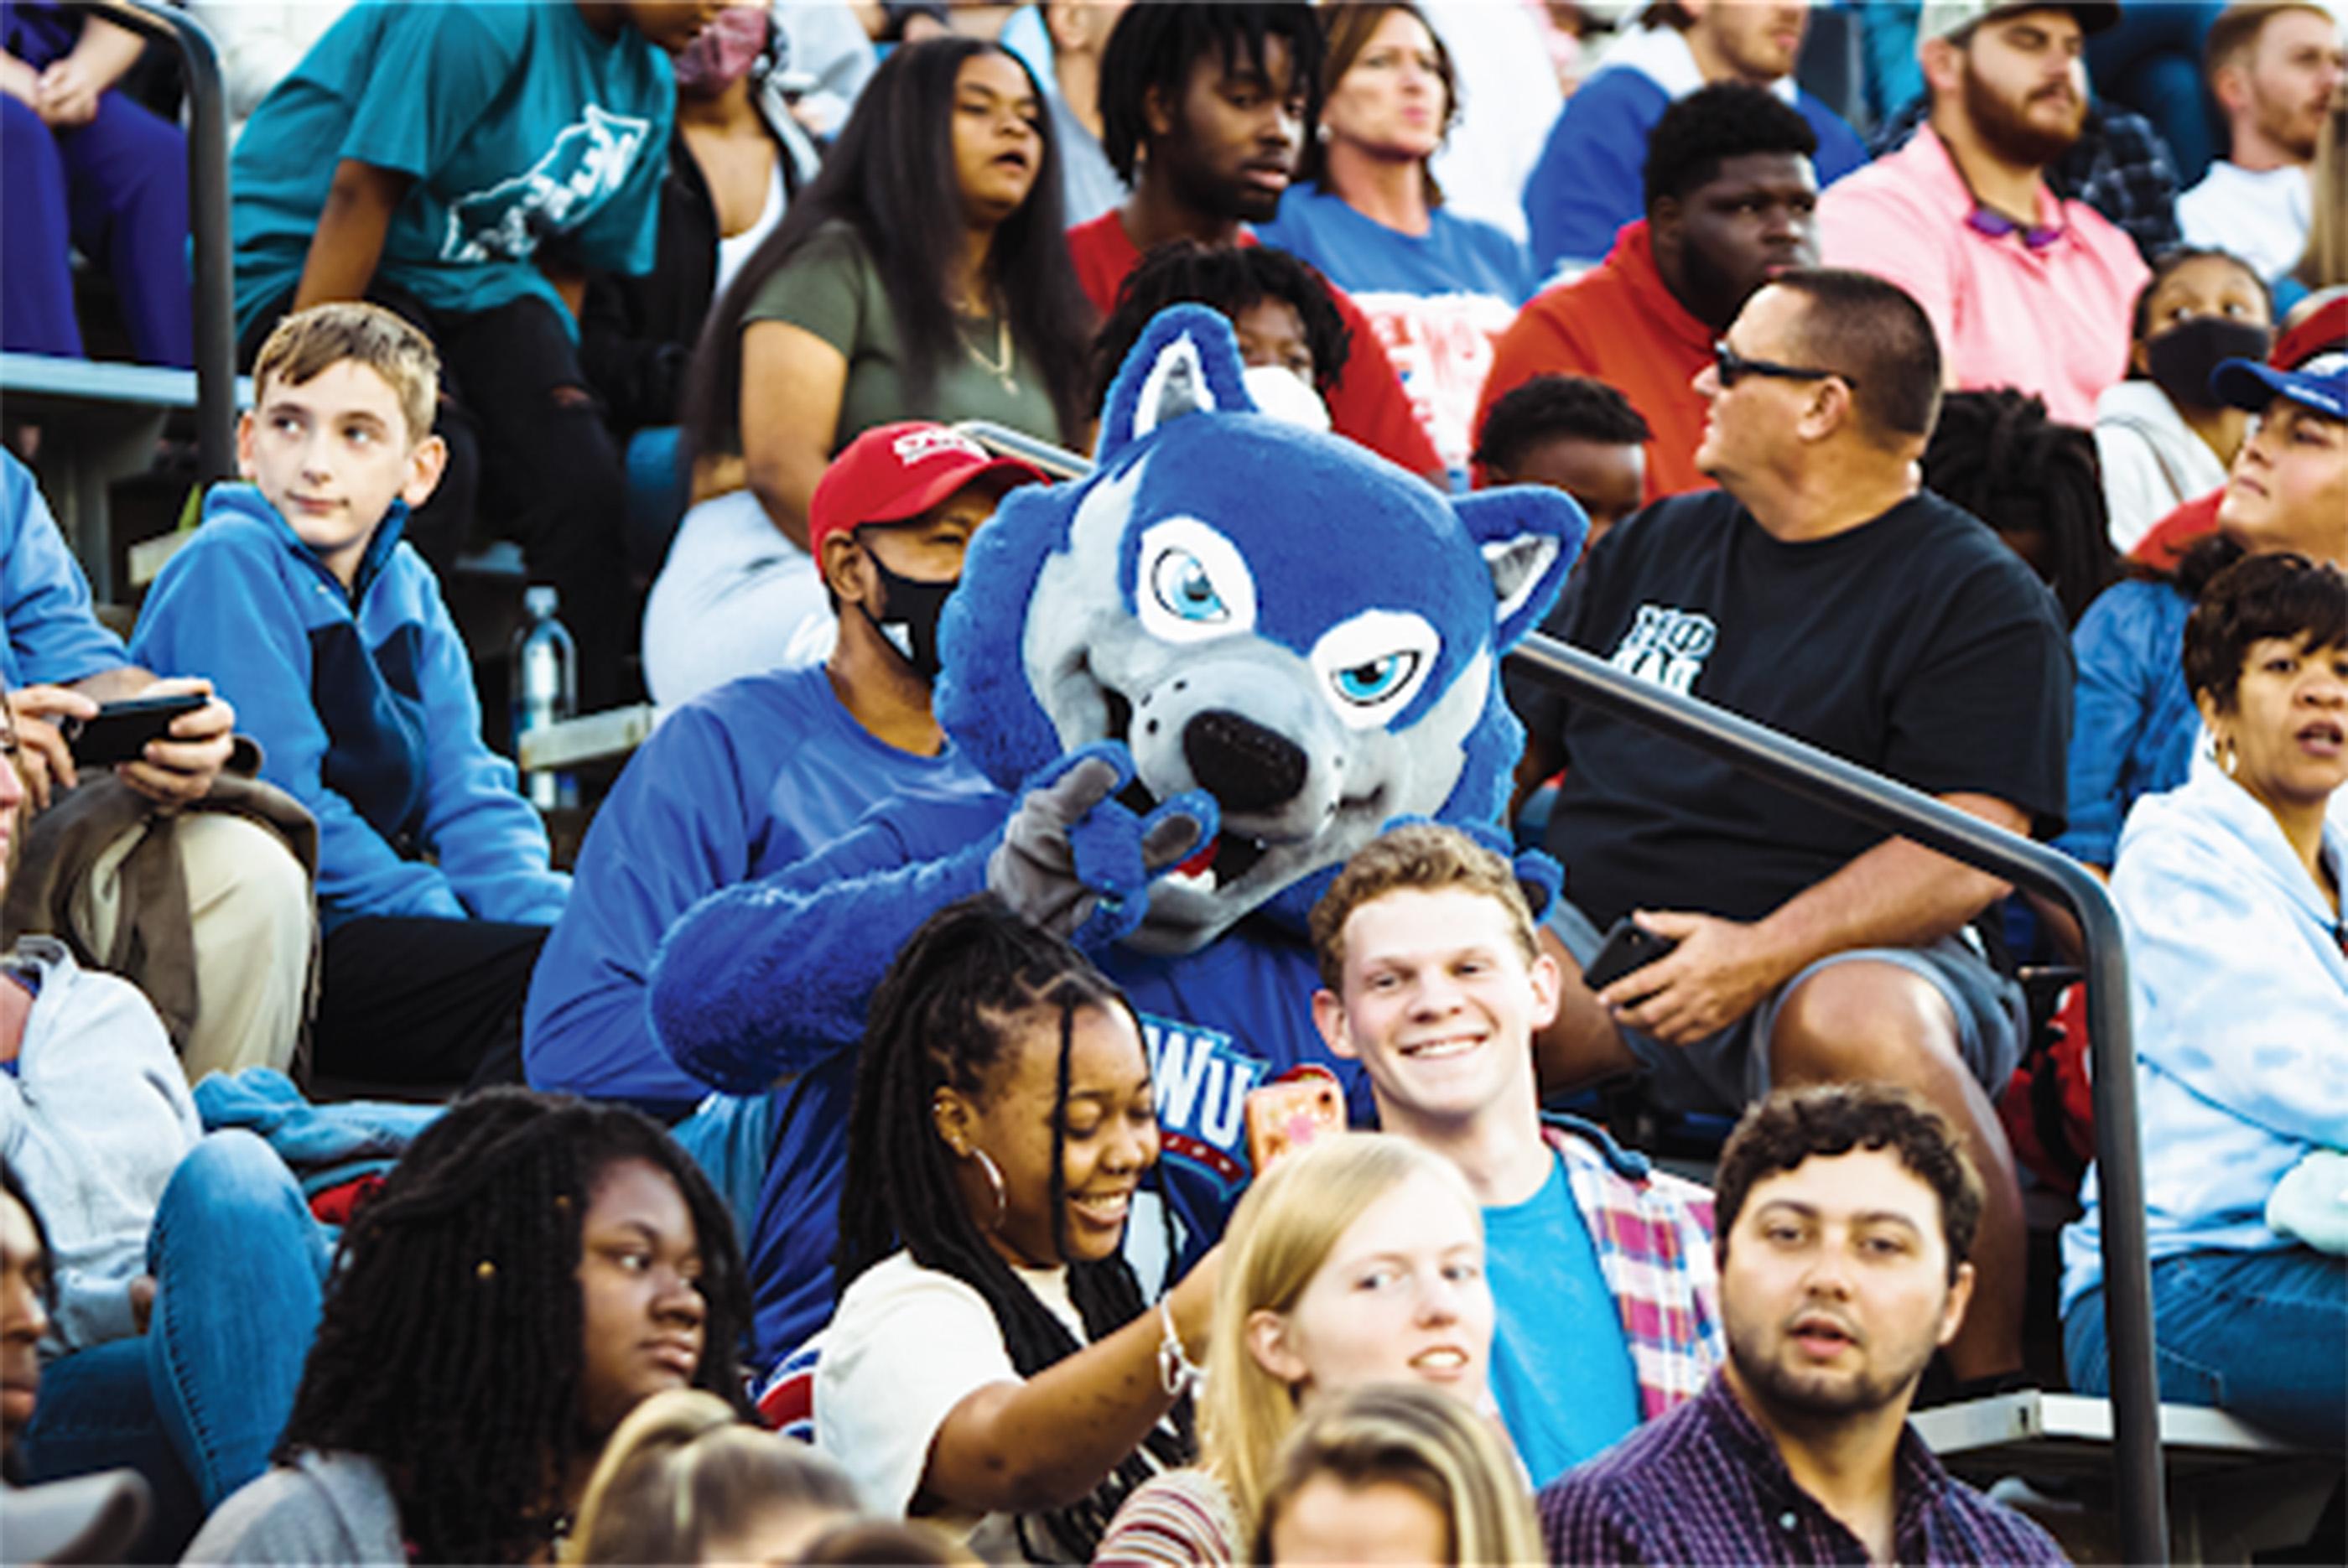 wolfie in a crowd with students and parents and friends at the stadium